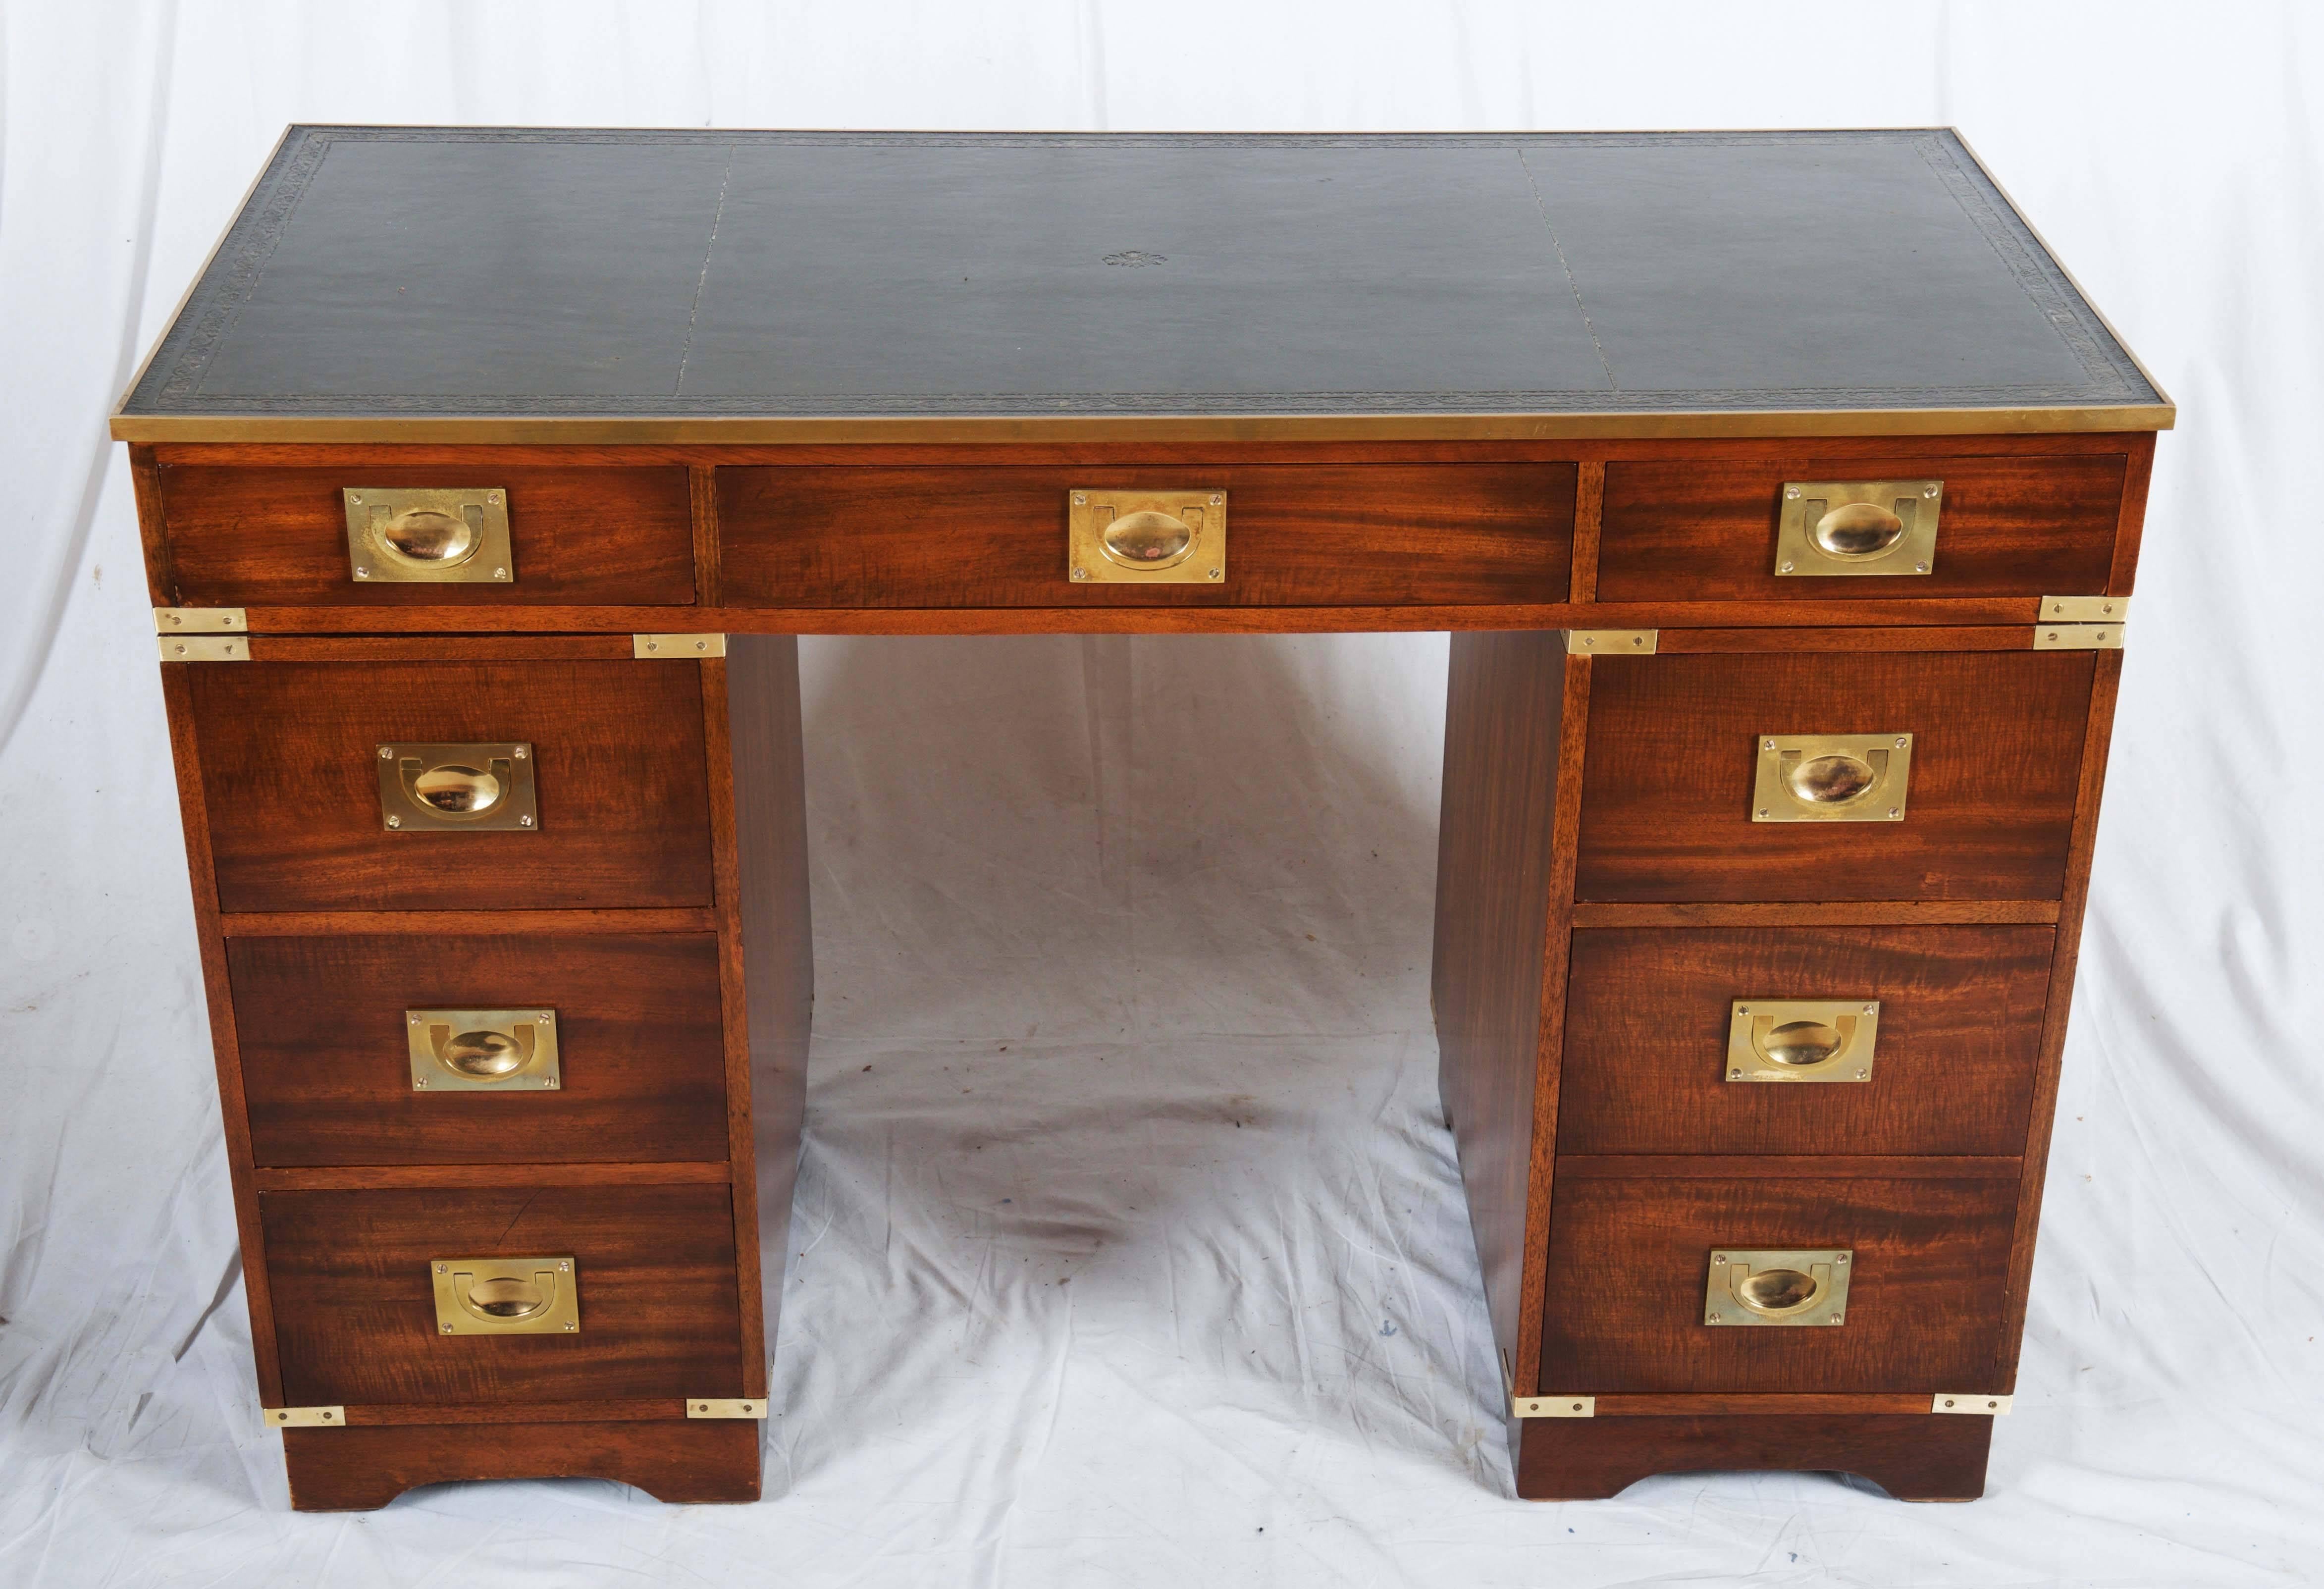 A three-part mahogany Campaign desk from circa 1950s.
It was already restored in the past, now just the surface was refreshed with shellac polish. Great proportions and a lovely design, brass Campaign hardware compliment the look.
 